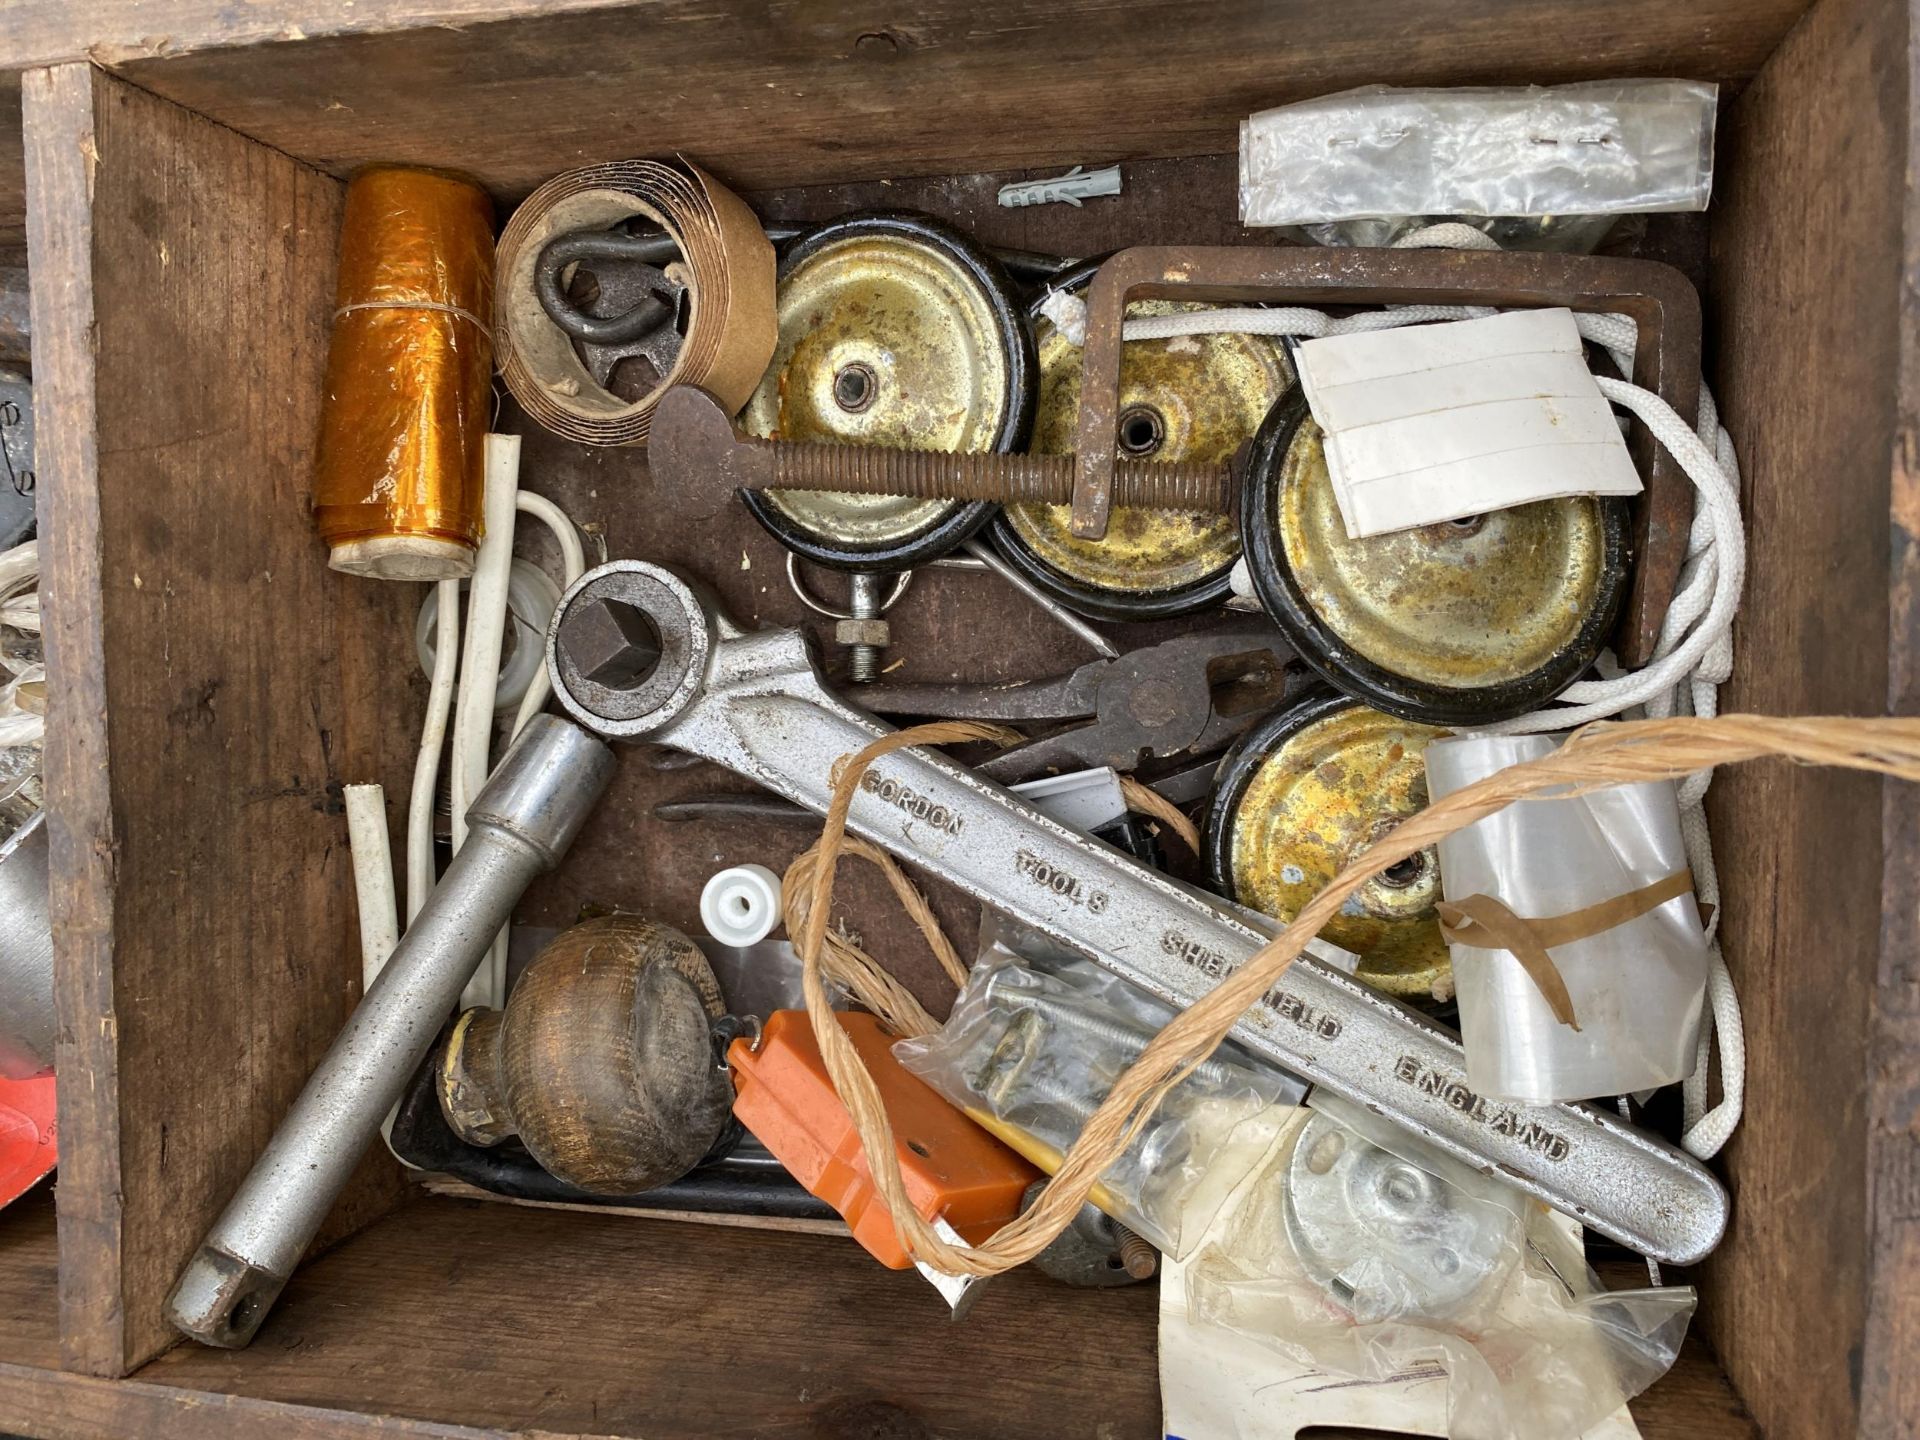 A LARGE VINTAGE ENGINEERS CHEST CONTAINING A LARGE ASSORTMENT OF TOOLS - Image 5 of 9